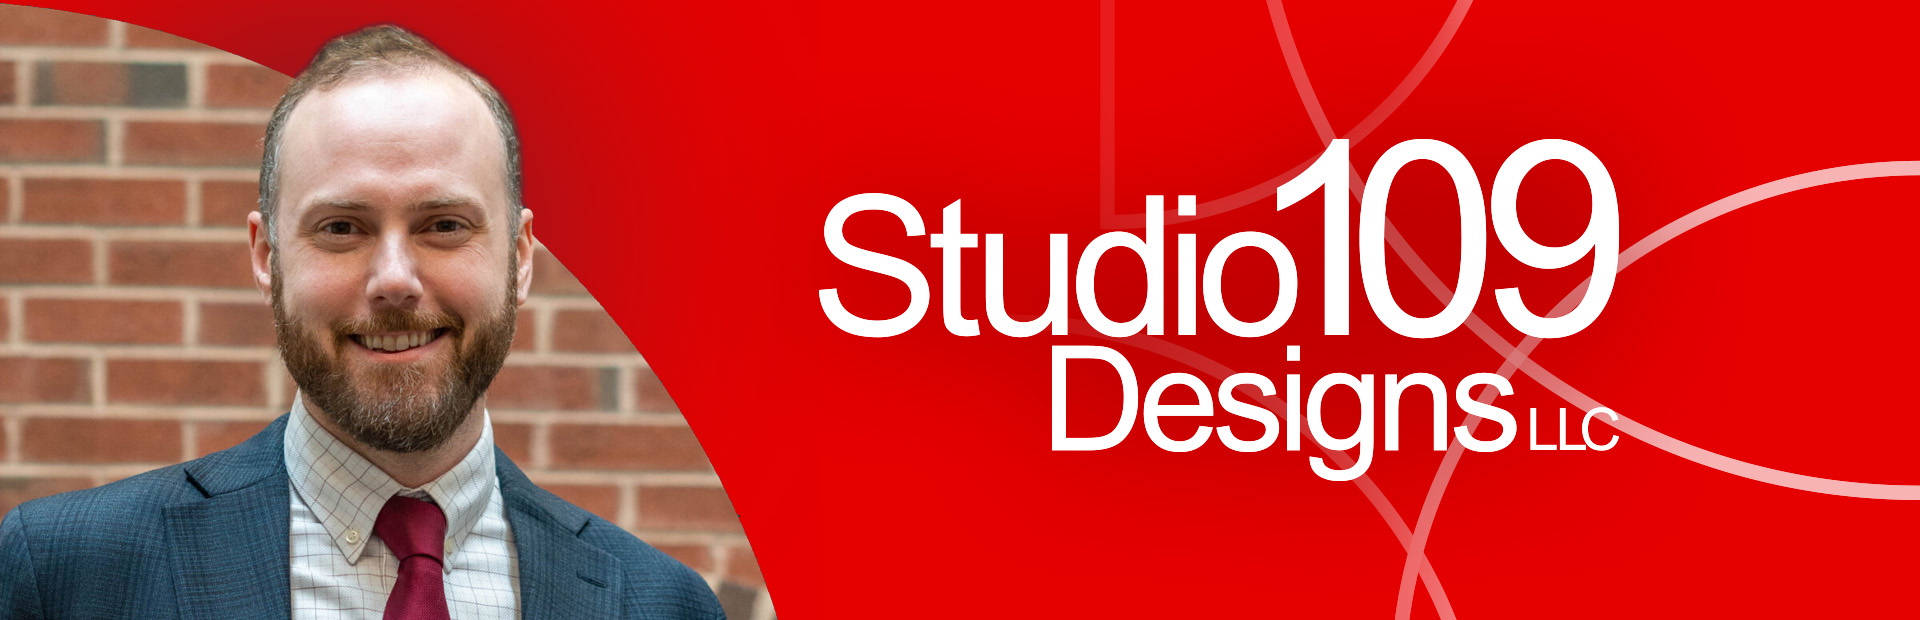 Rob Zoelle, RA, LEED AP, joins Sudio109 as Design Architect